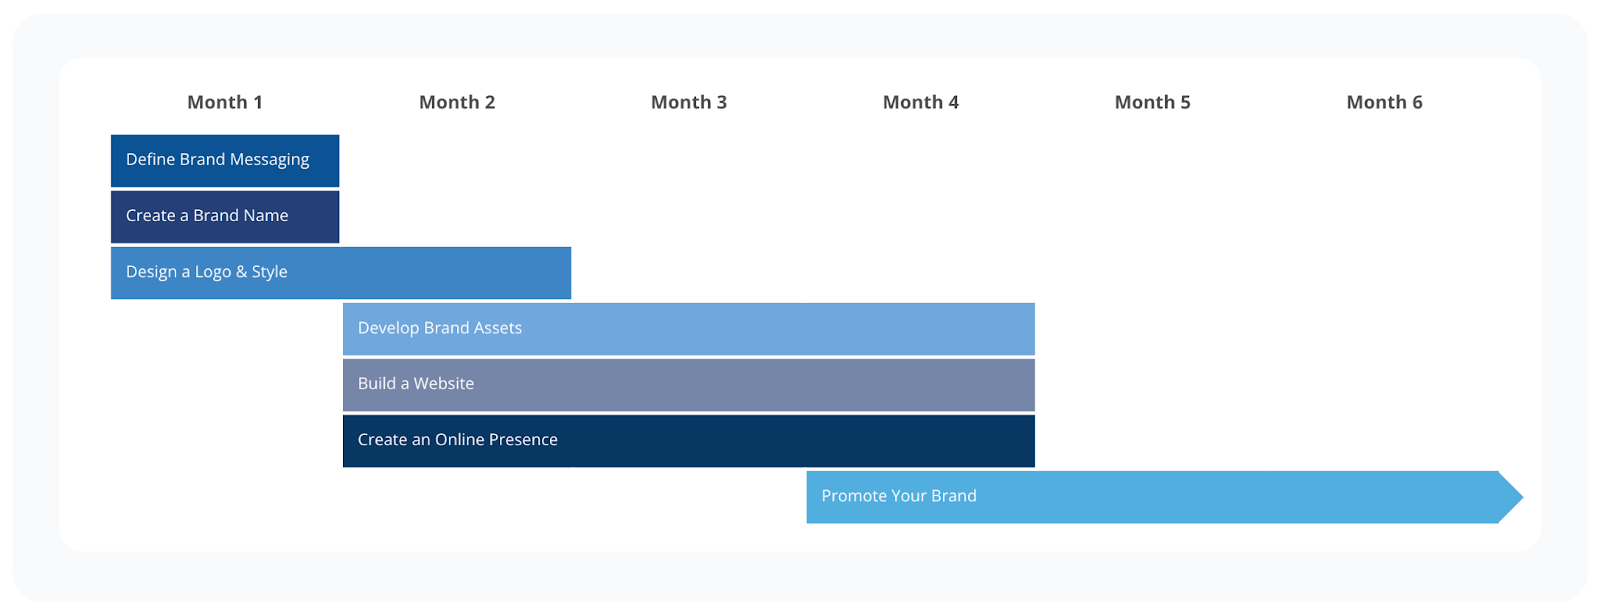 A Gantt chart showing the processes and timeline for creating a new law firm brand